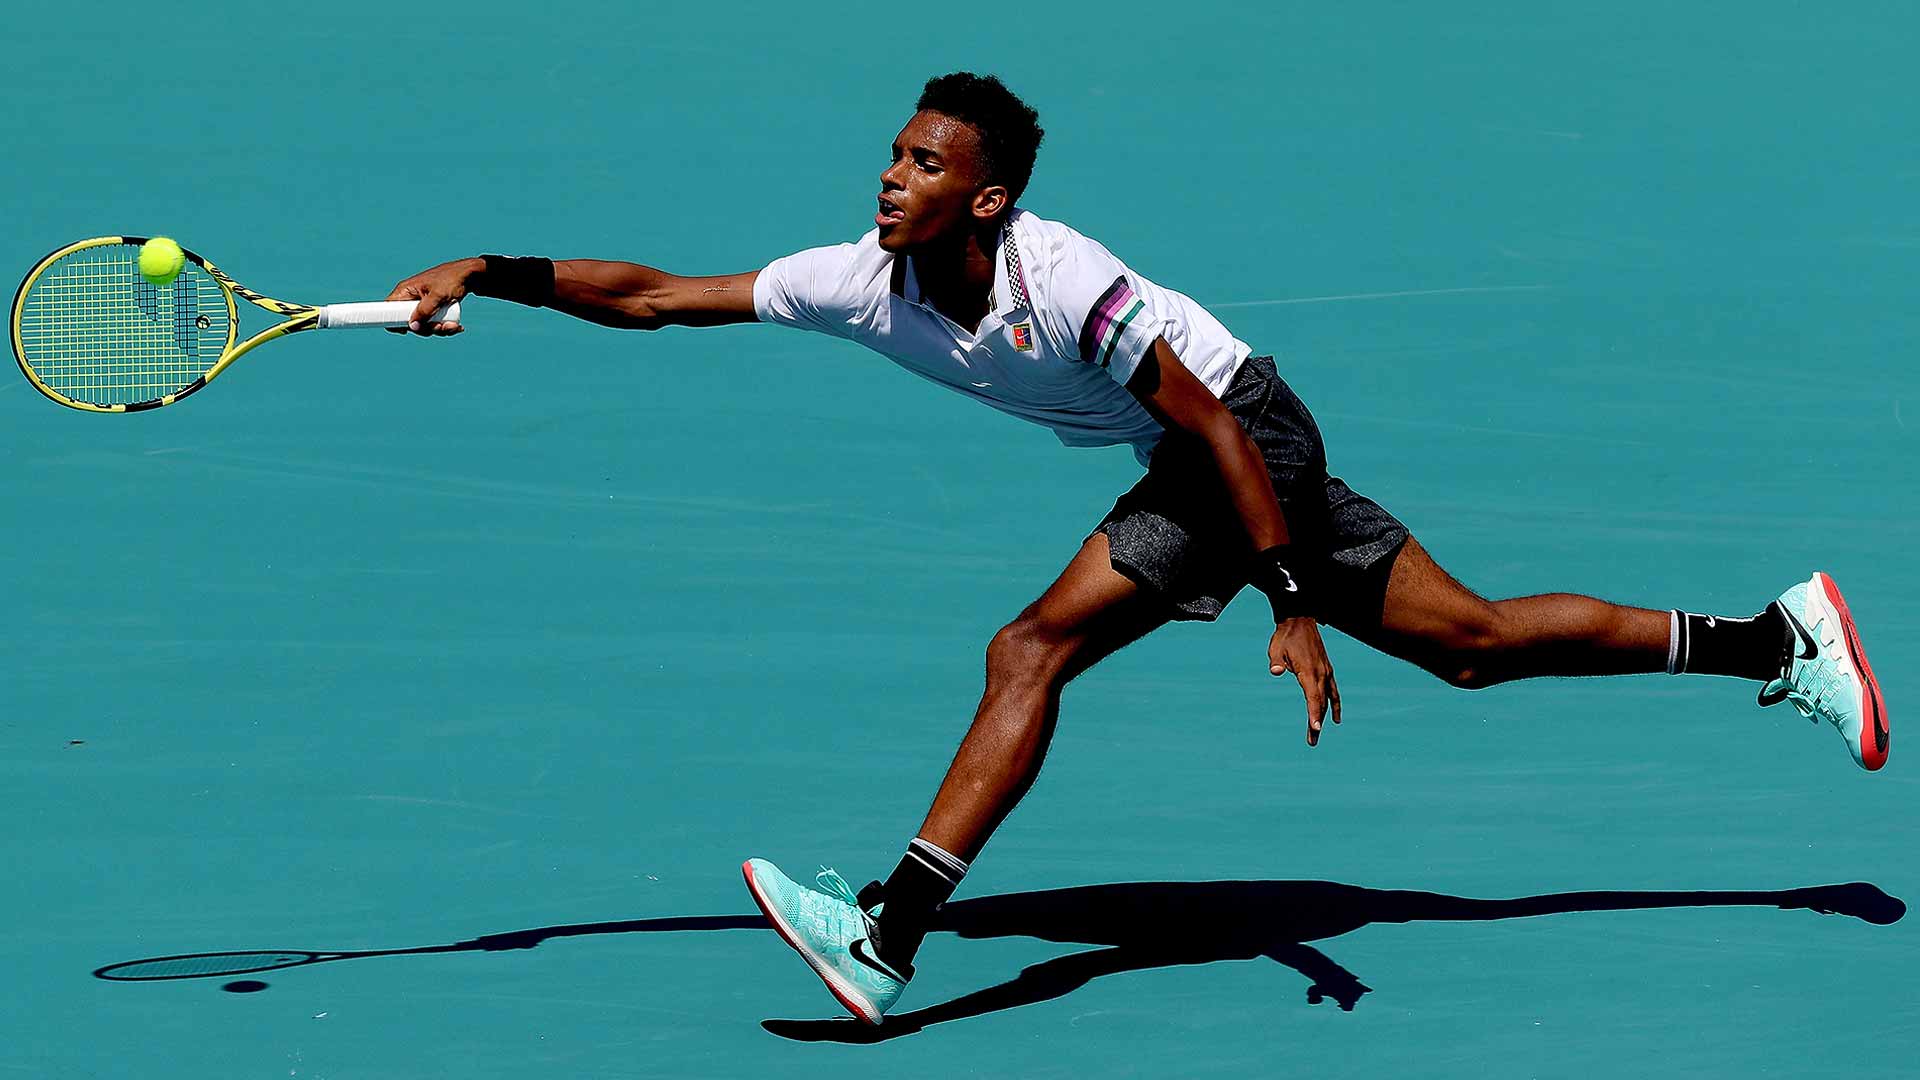 Miami 2019. <a href='https://www.atptour.com/en/players/felix-auger-aliassime/ag37/overview'>Felix Auger-Aliassime</a> stretches for a ball while playing <a href='https://www.atptour.com/en/players/nikoloz-basilashvili/bg23/overview'>Nikoloz Basilashvili</a> in Masters 1000 action. (Photo by Matthew Stockman/Getty Images)